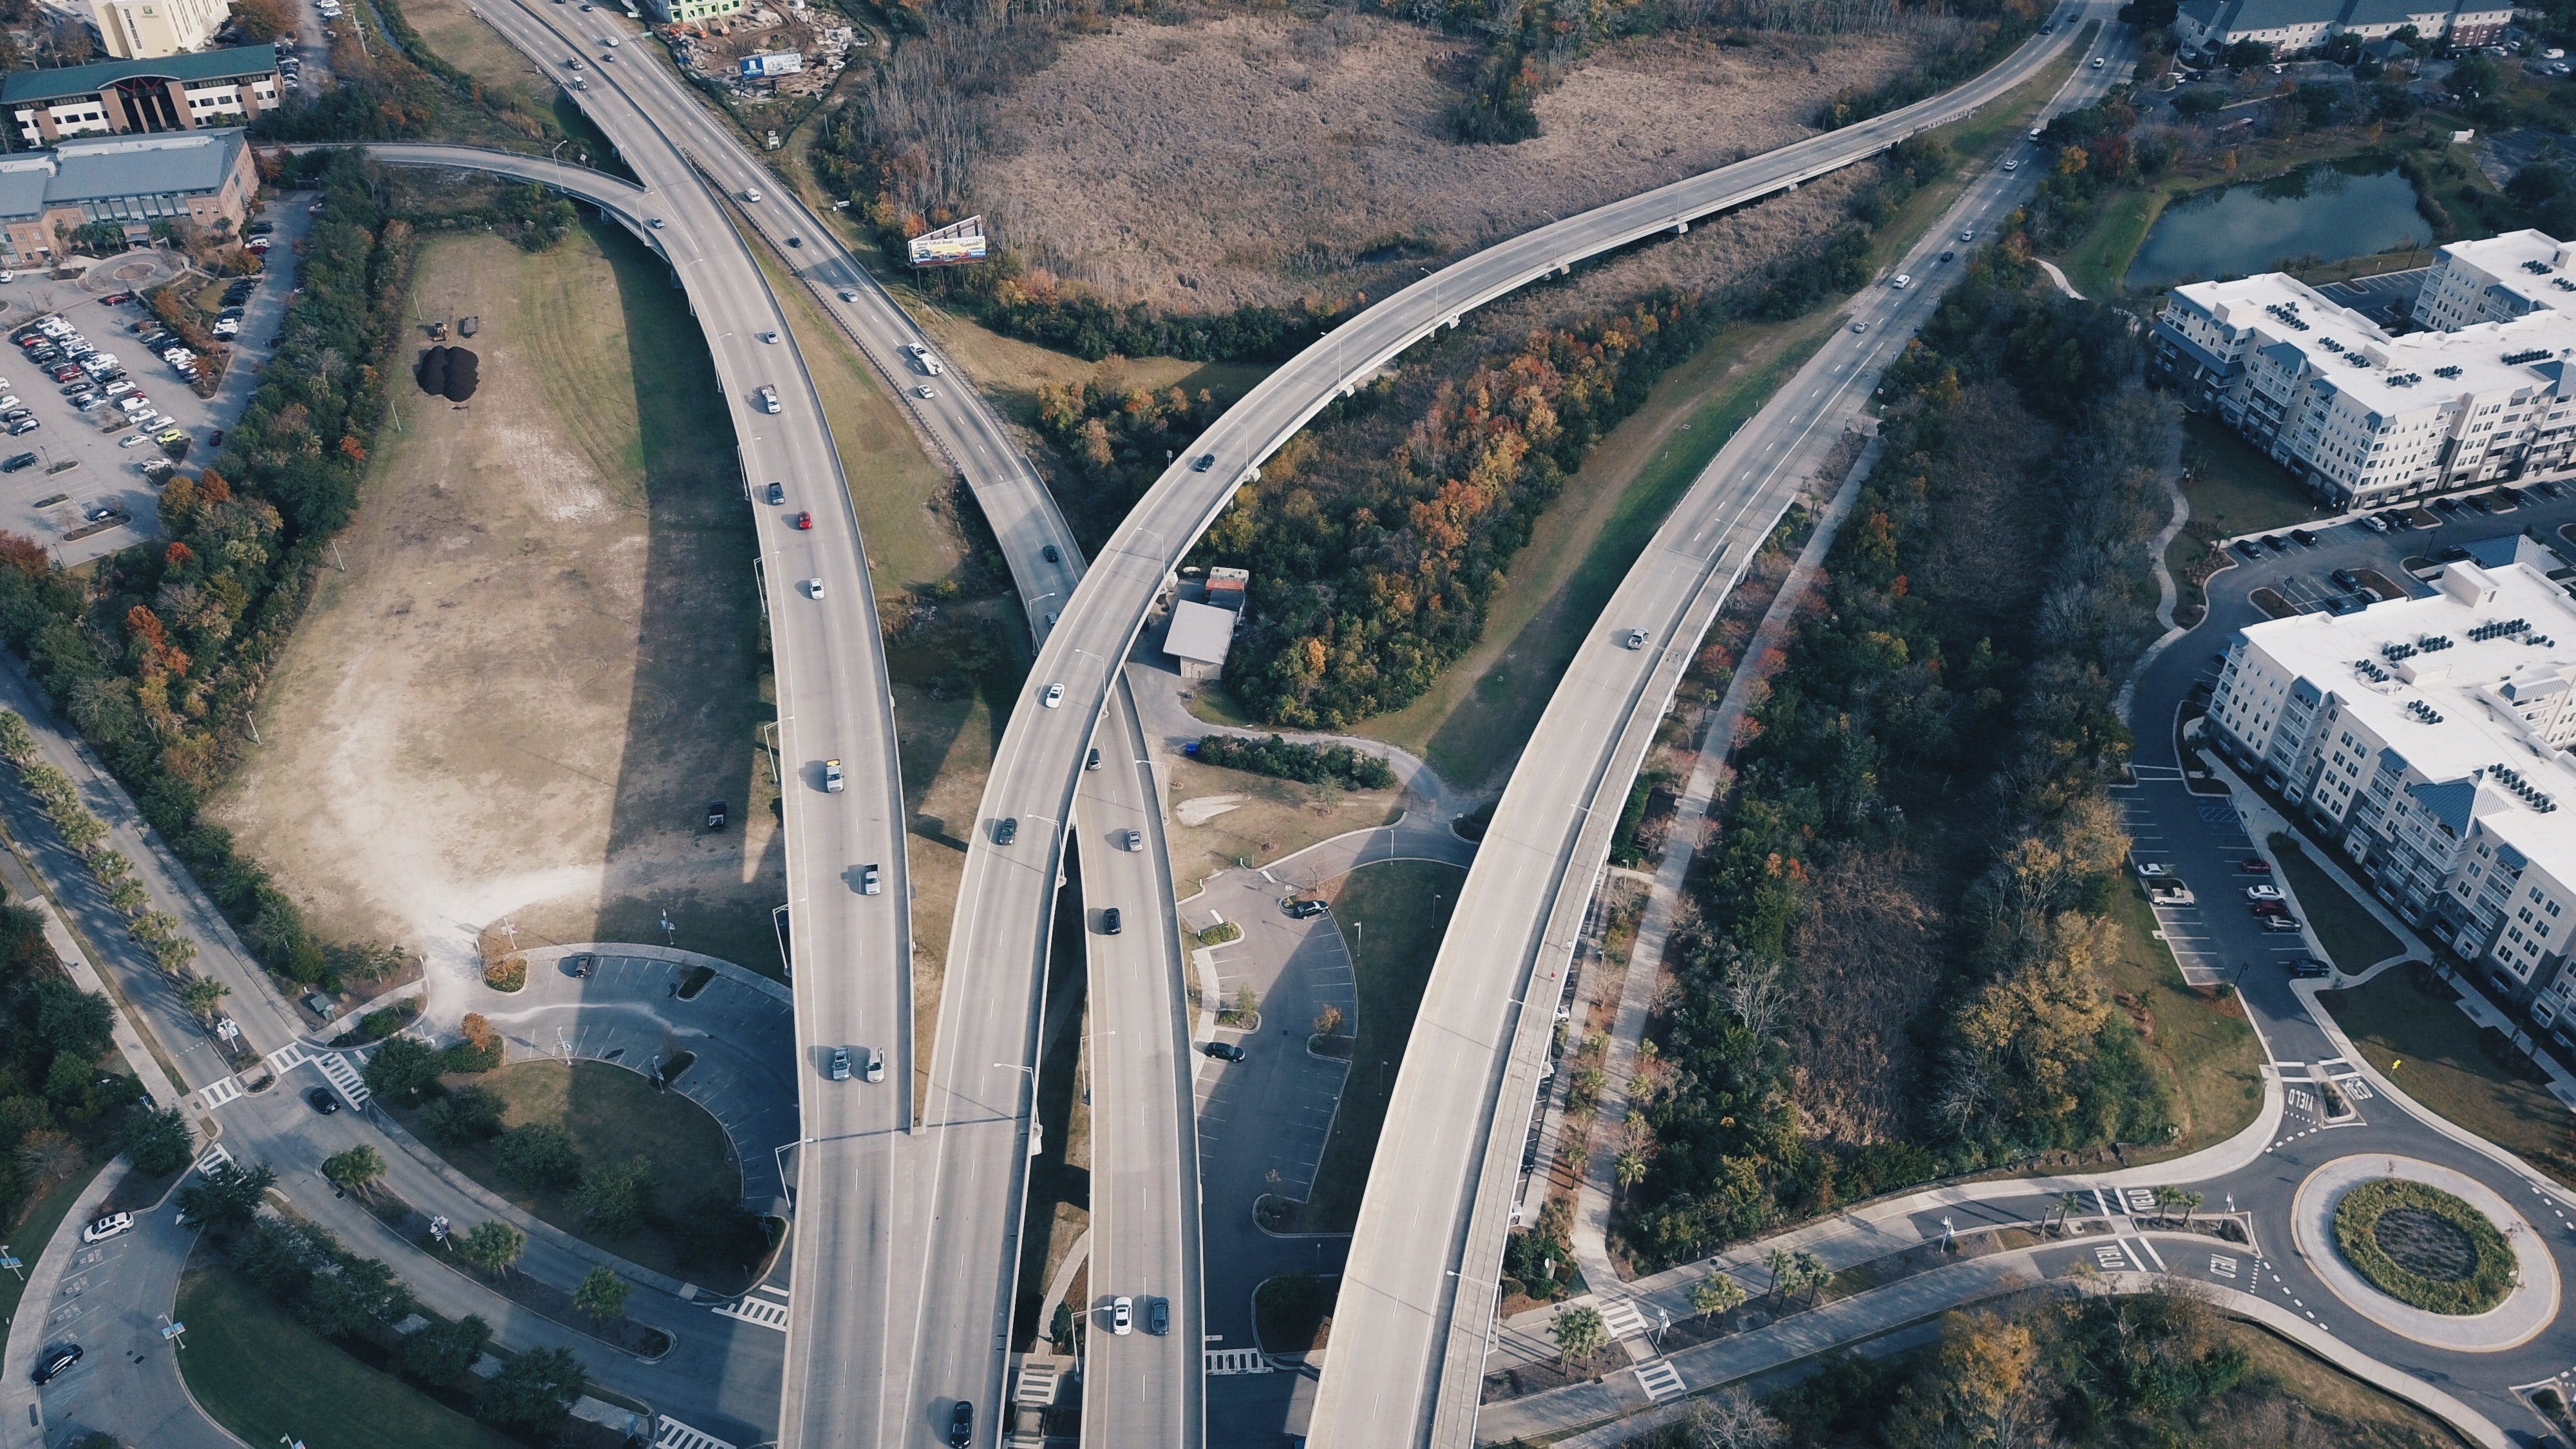 Aerial view of a busy highway interchange with multiple lanes and overpasses, depicting complex roadways that might be navigated during interstate travel, with relevance to laws and regulations surrounding traveling with firearms.